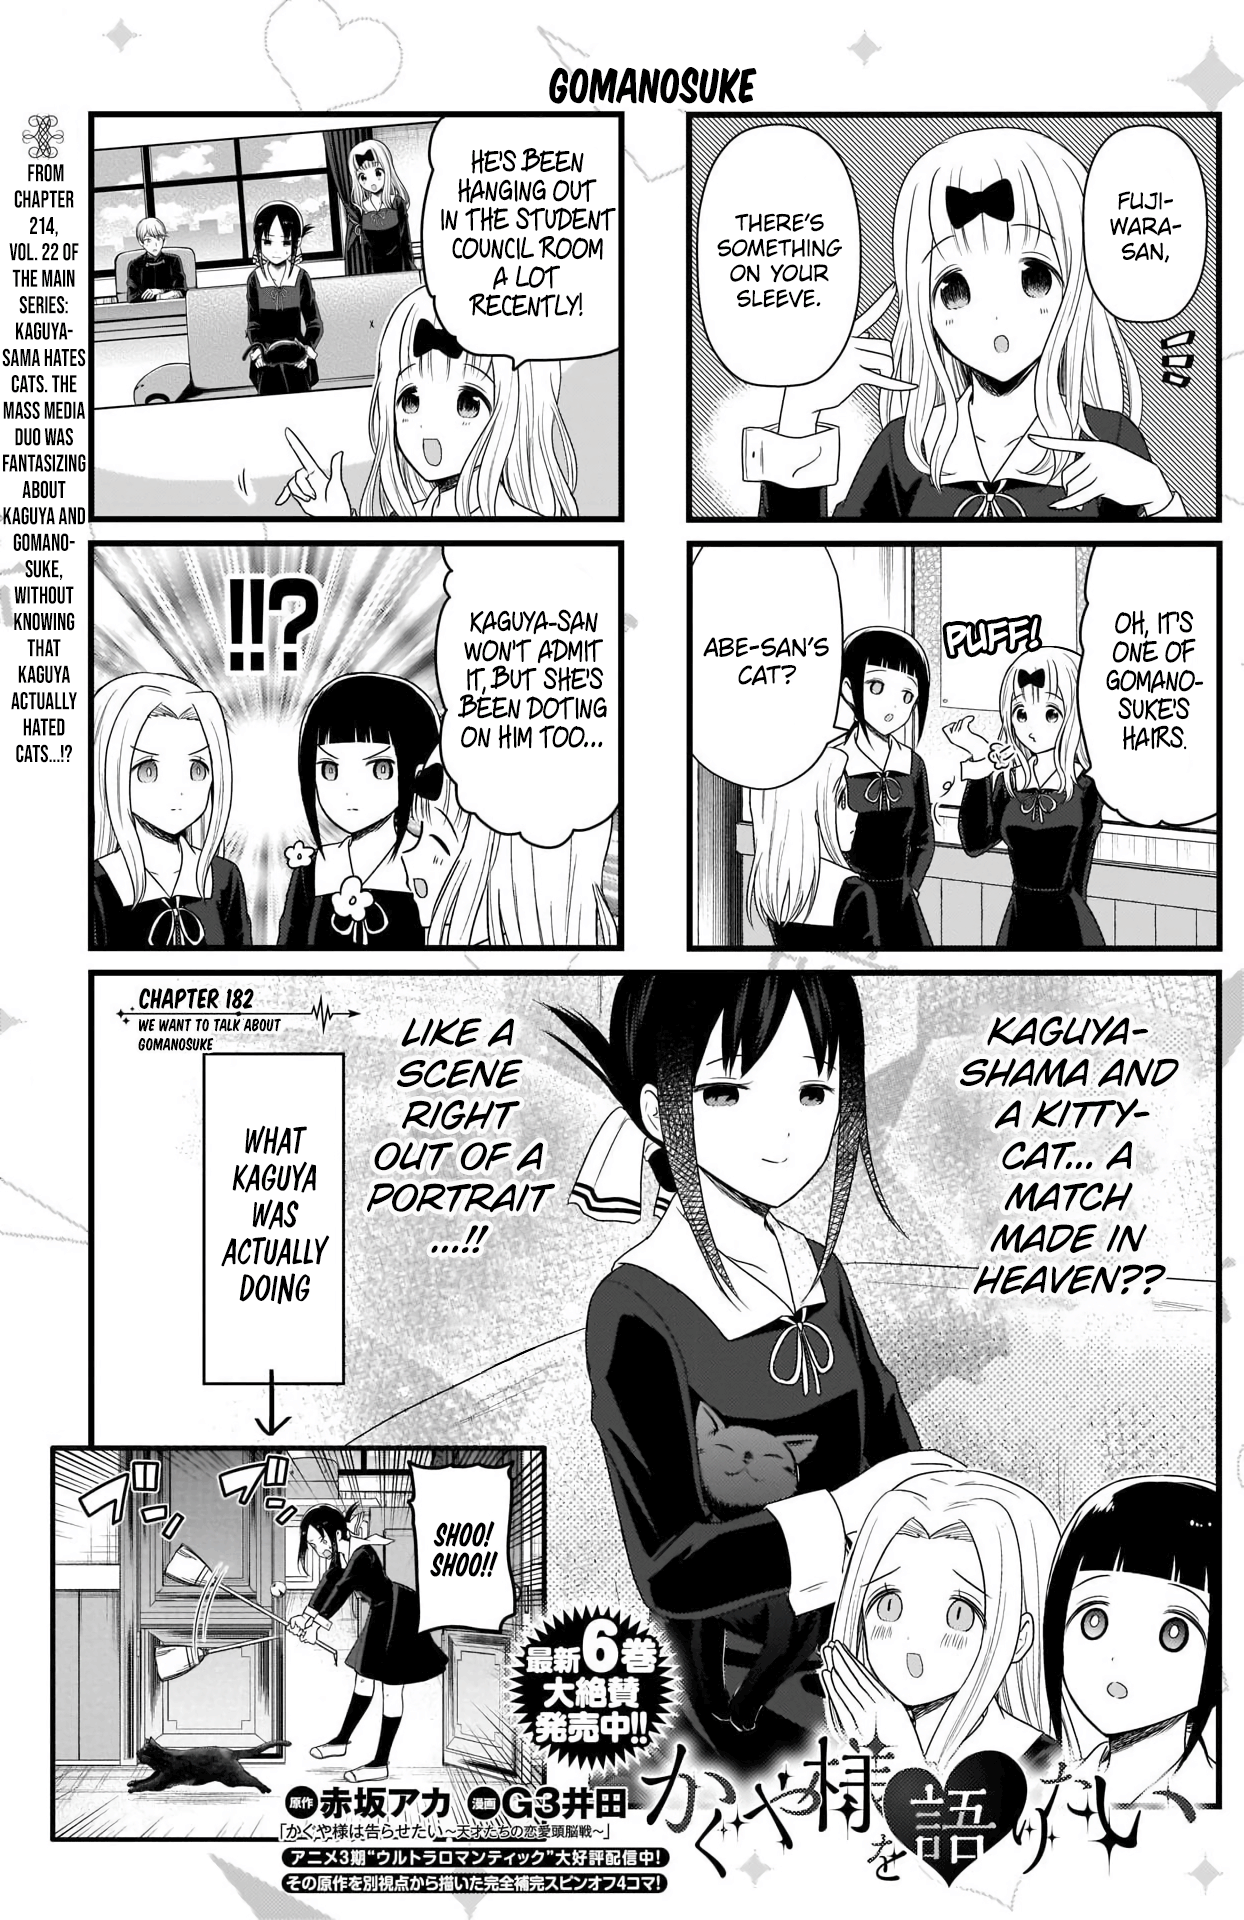 186 - The Single Guys Want to Talk, Page 1 - We Want To Talk About Kaguya